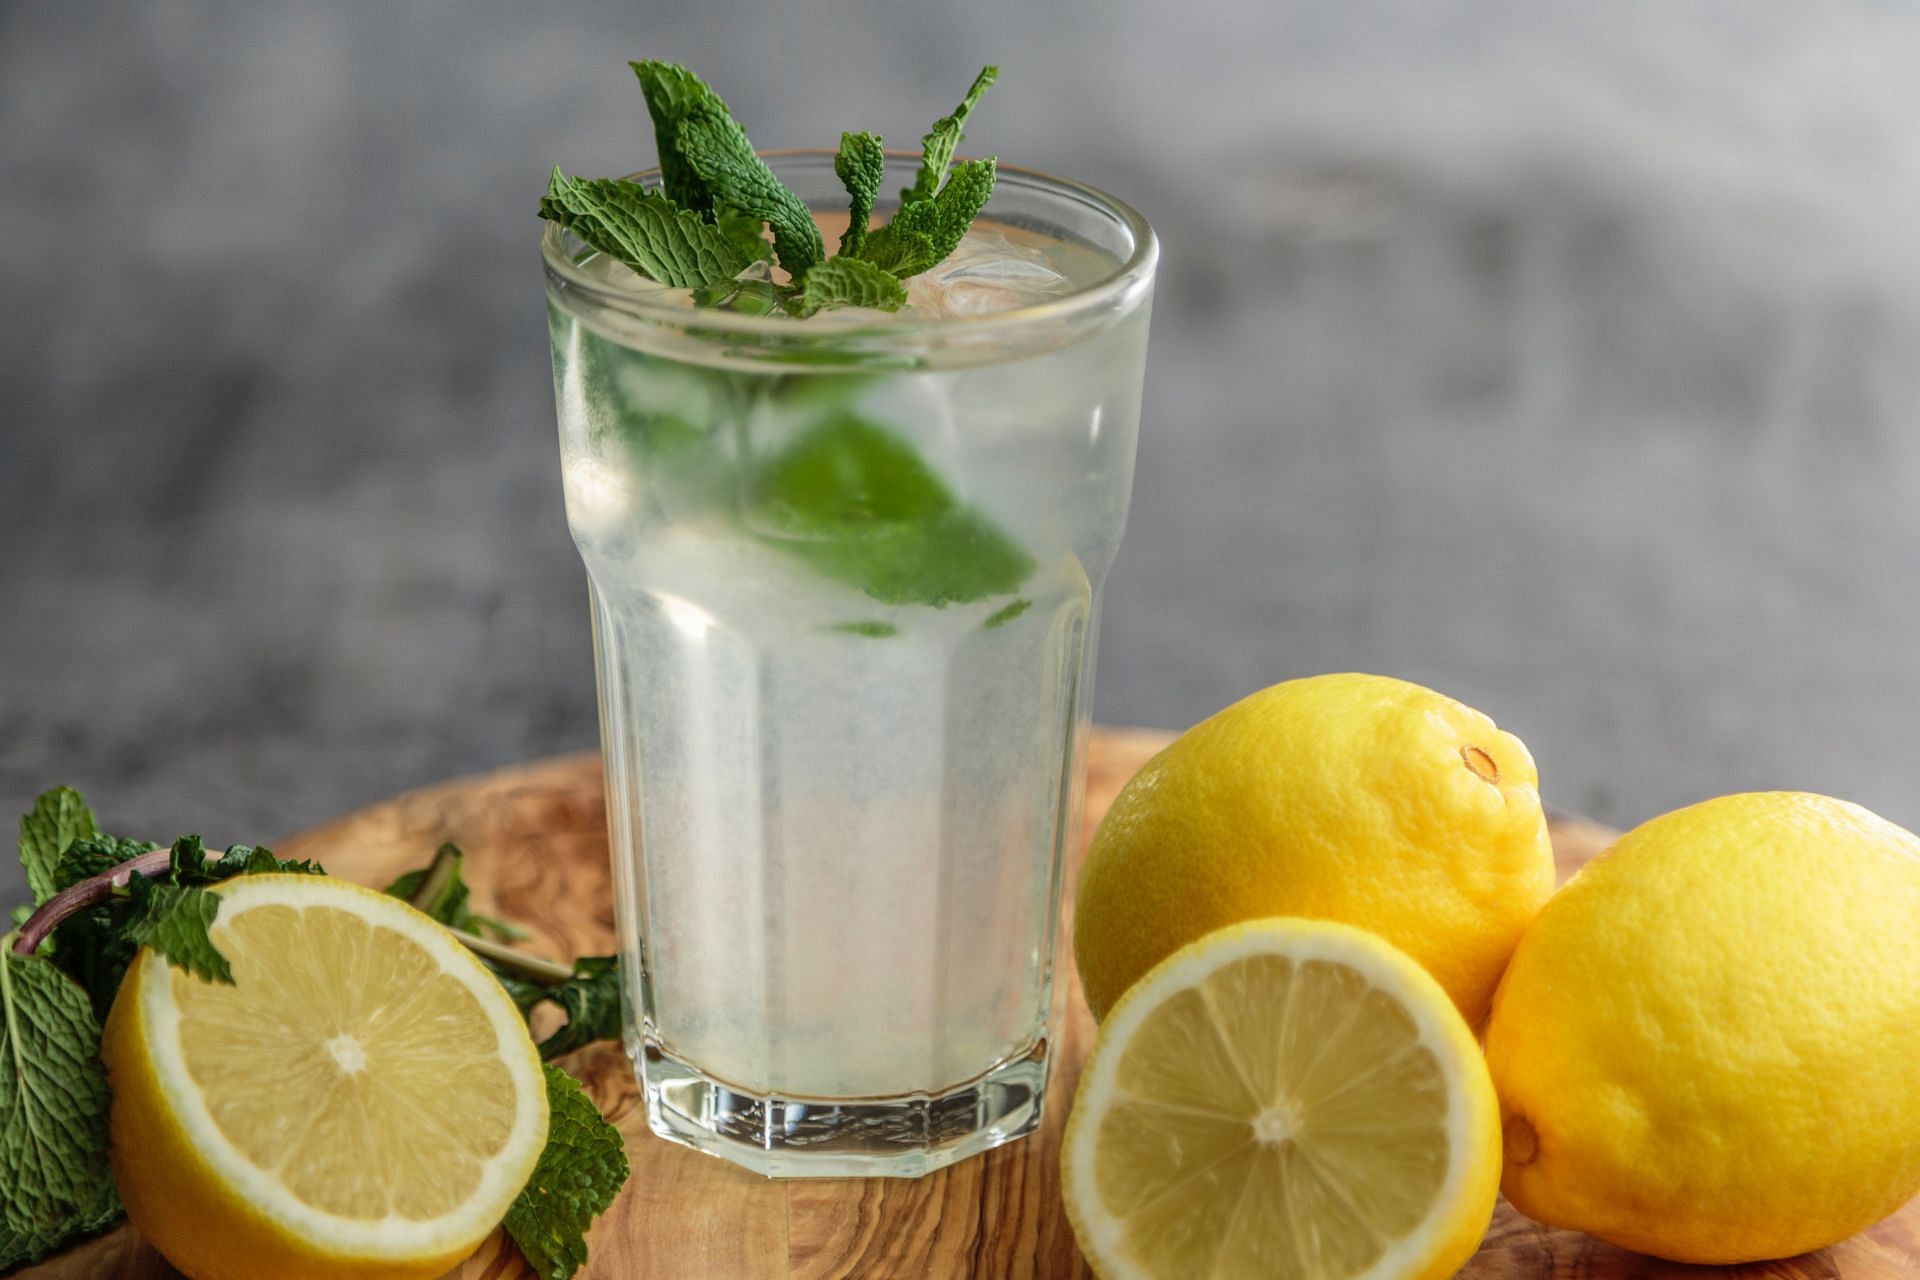 Drinking lemon water at room temperature is more beneficial for the body. (Image via Francesca Hotcin)